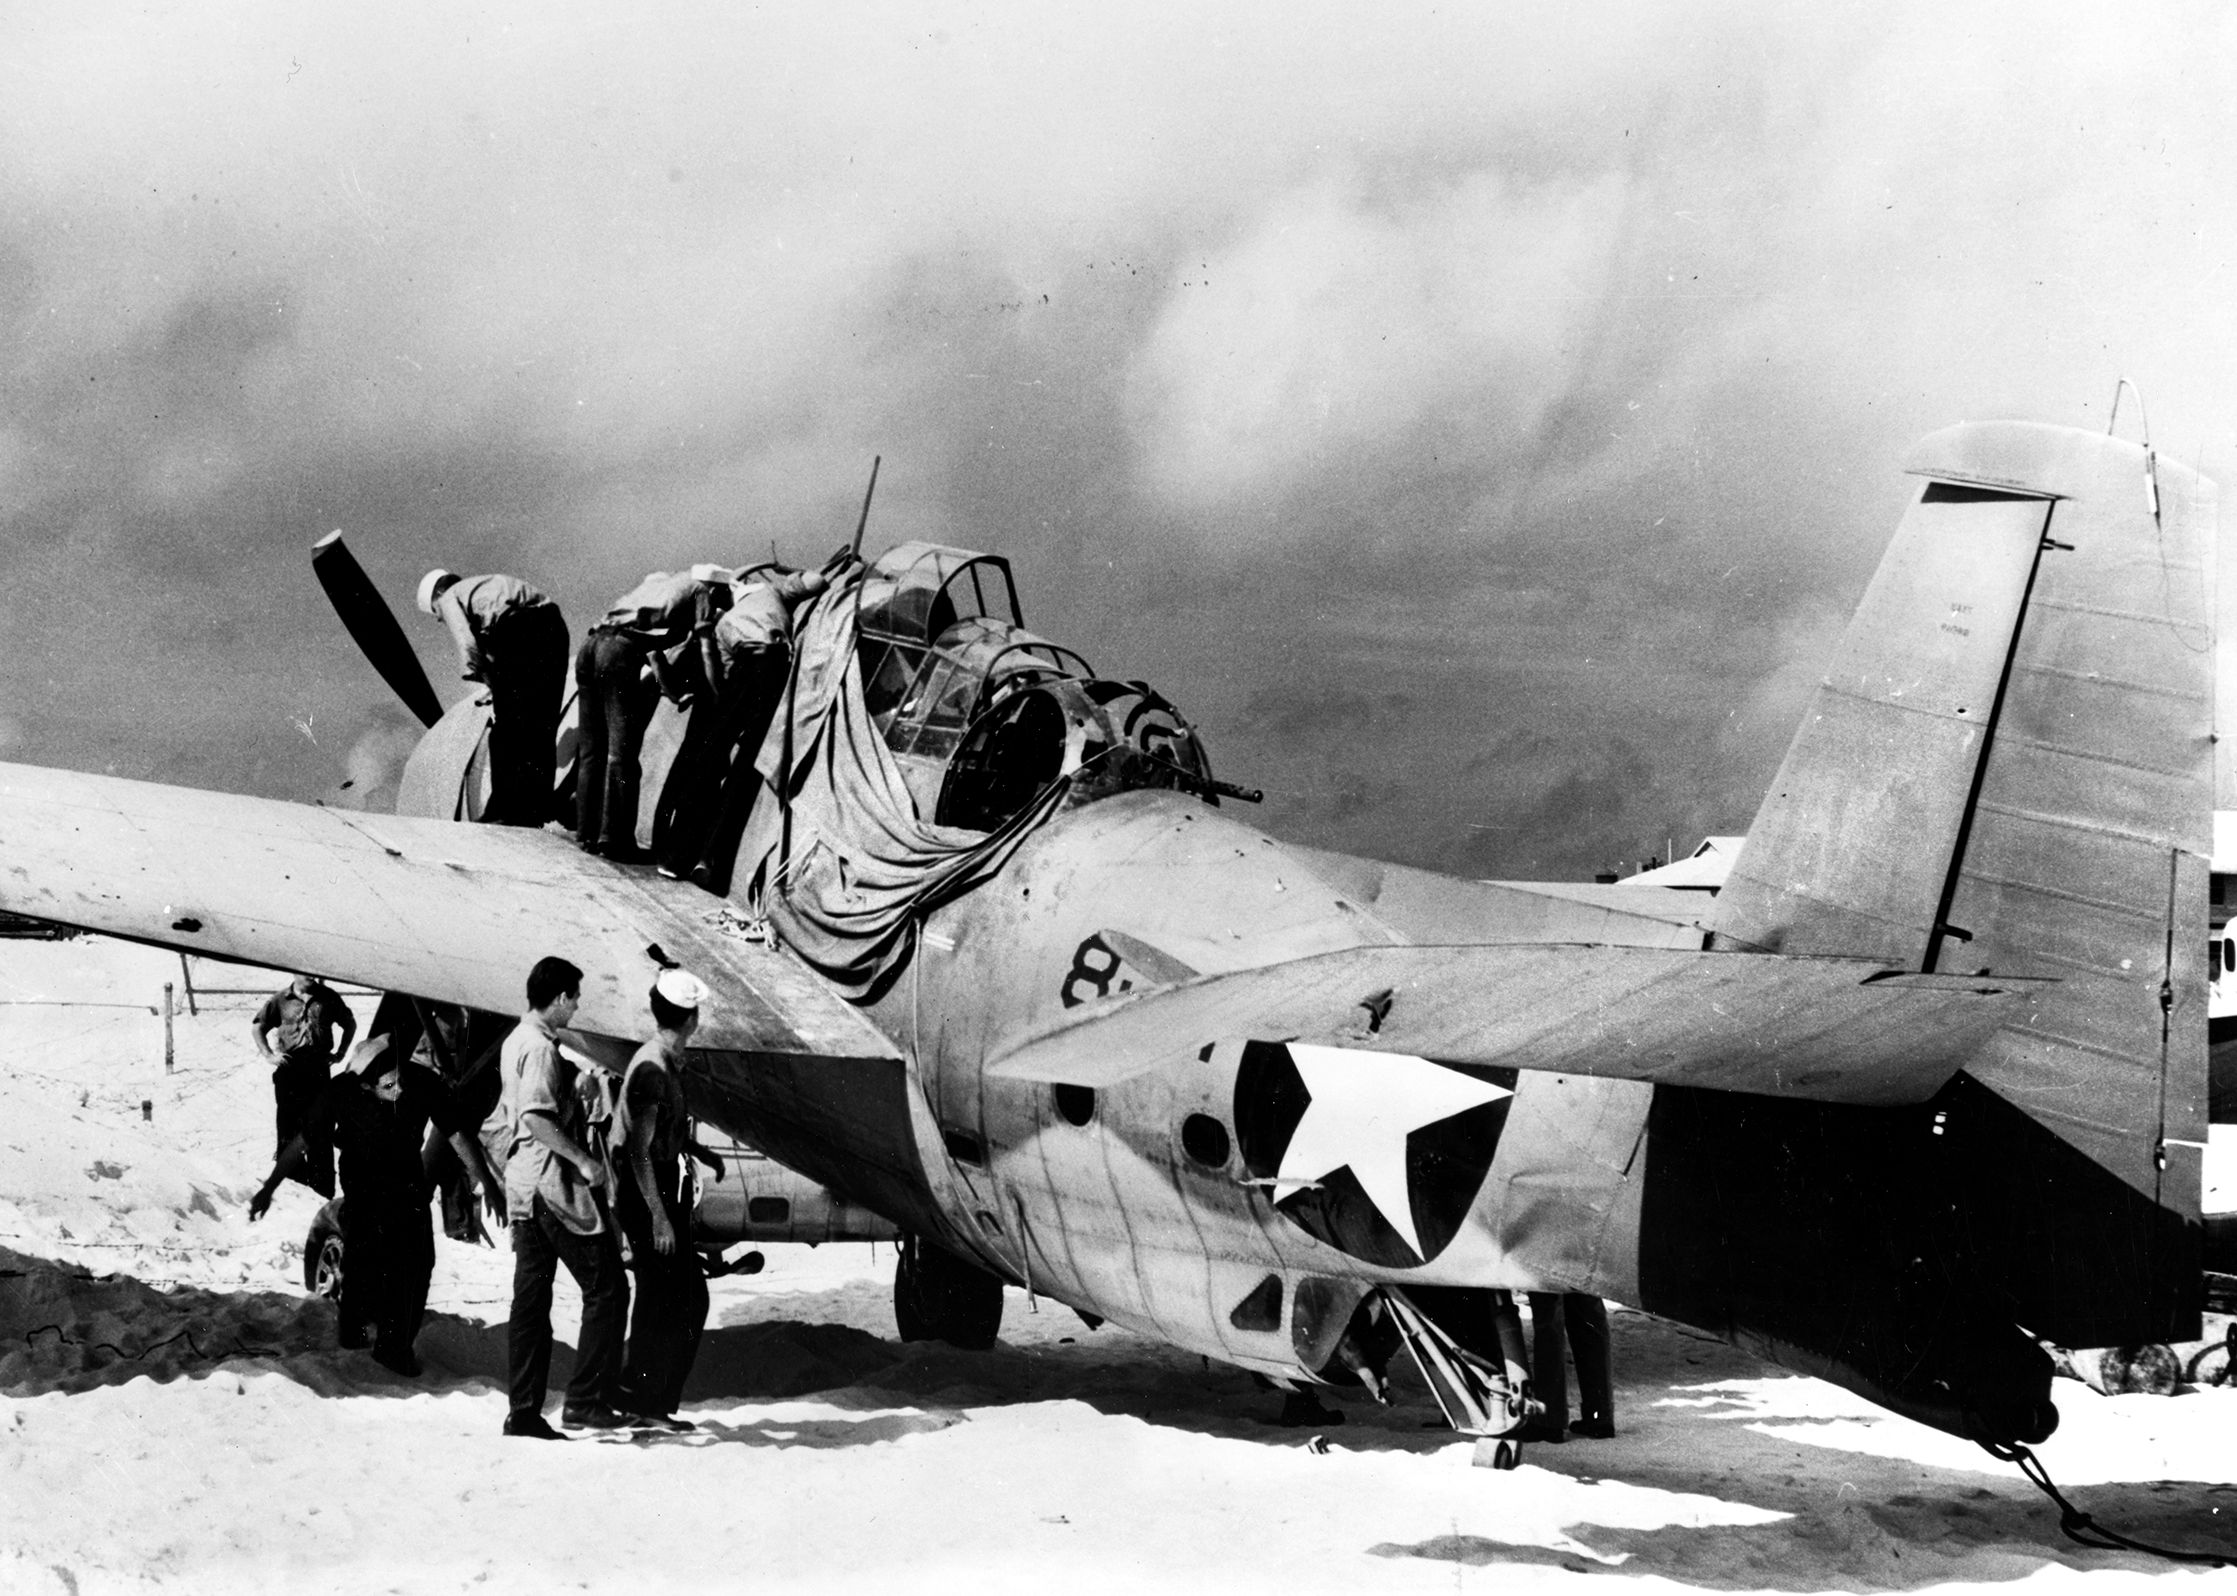 This badly damaged TBF-1 Avenger, flown by Ensign Albert K. Earnest, was the only plane of Torpedo Squadron 8 to survive the Battle of Midway and would never fly again. Radioman Harry Ferrier and Seaman 1st Class Jay D. Manning were also aboard. Manning, who operated the .50-caliber machine gun, was killed in action. Six Avengers based at Midway and 15 Devastators from the USS Hornet had taken off that morning.